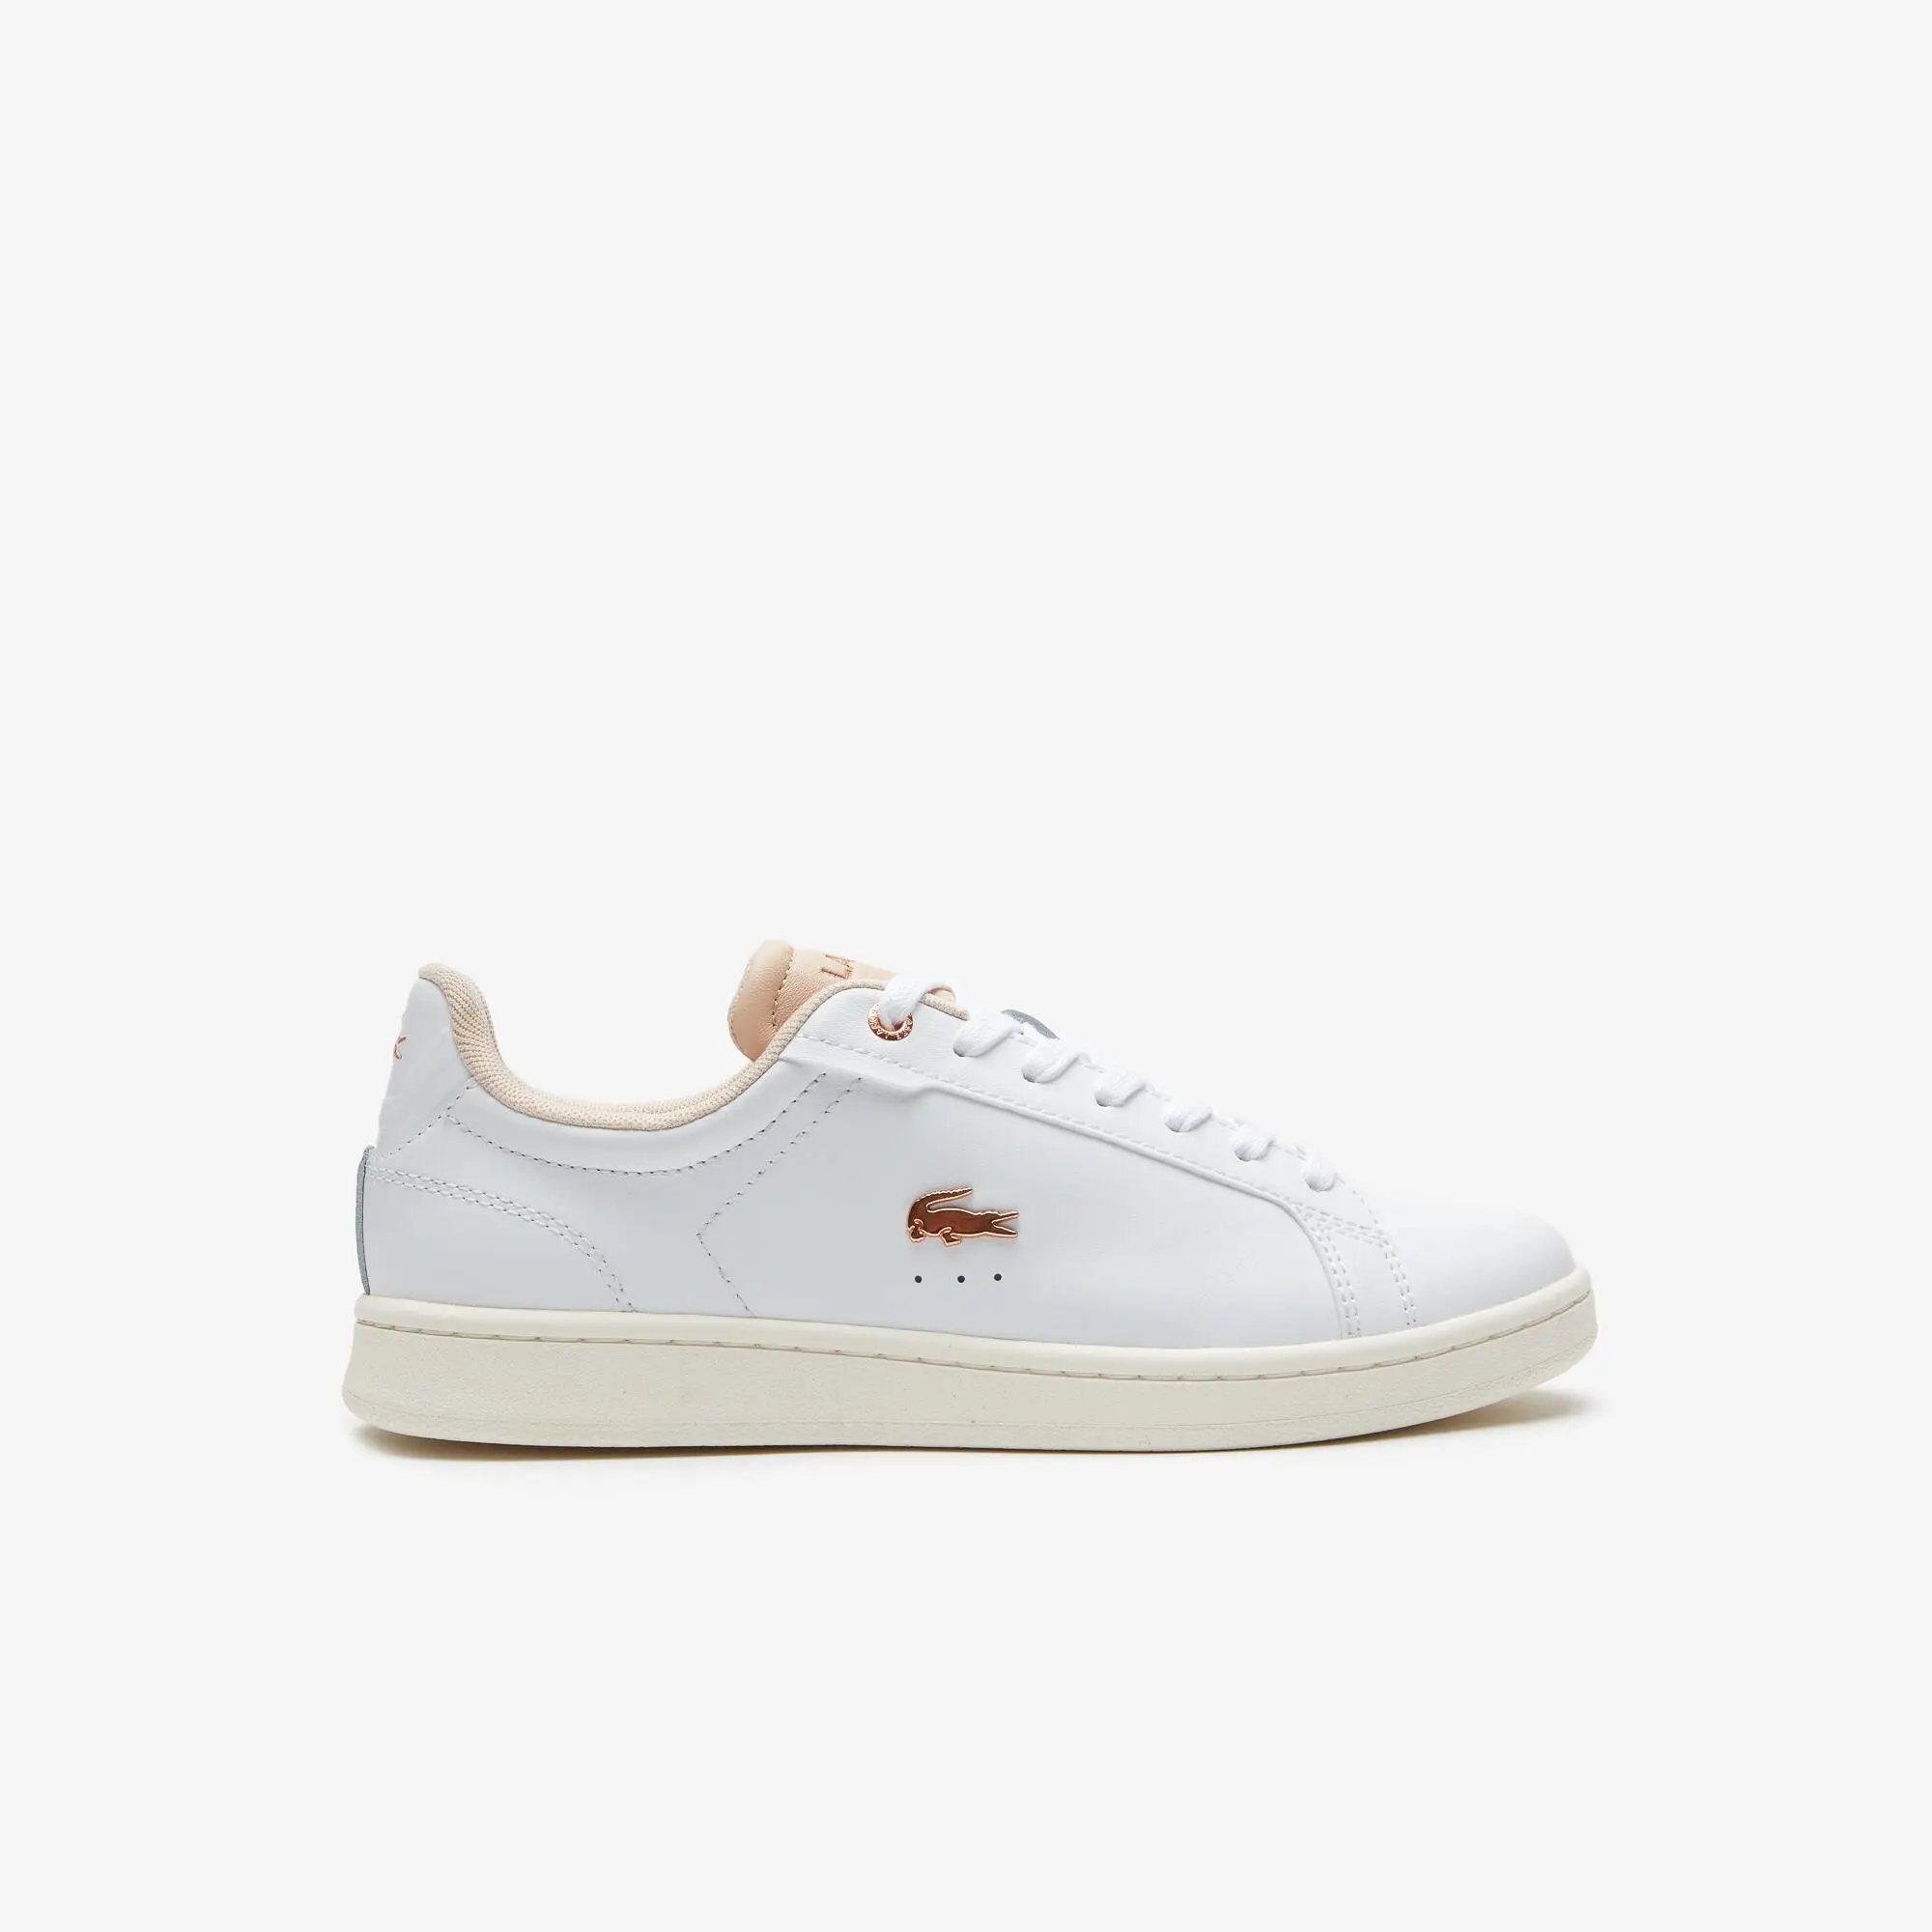 Lacoste Women's Lacoste Carnaby Pro Leather Trainers. 1